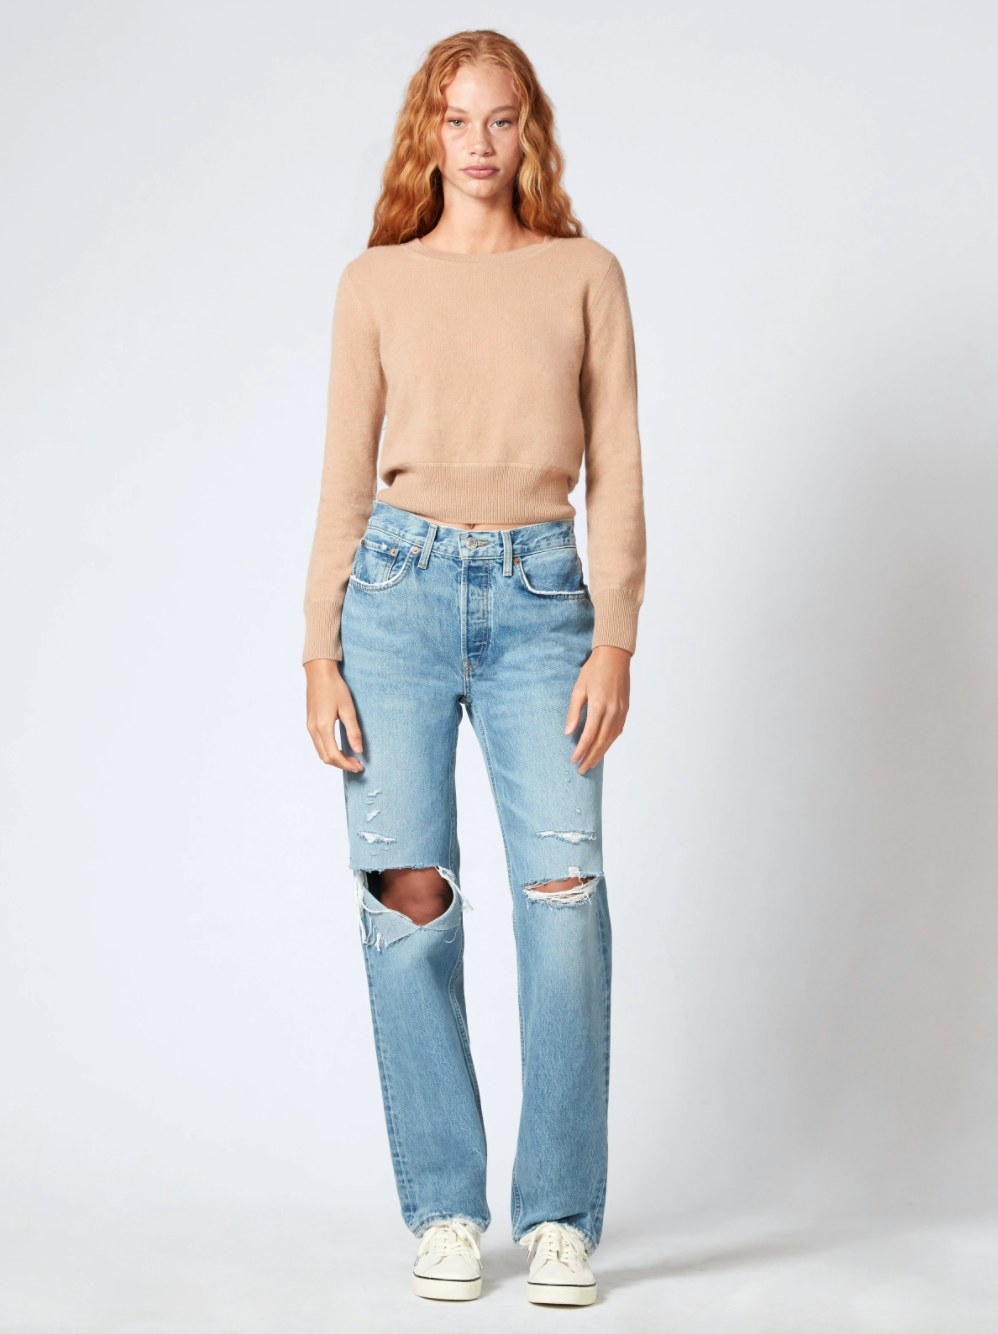 the 90s RE/DONE comfy high rise jeans on a model